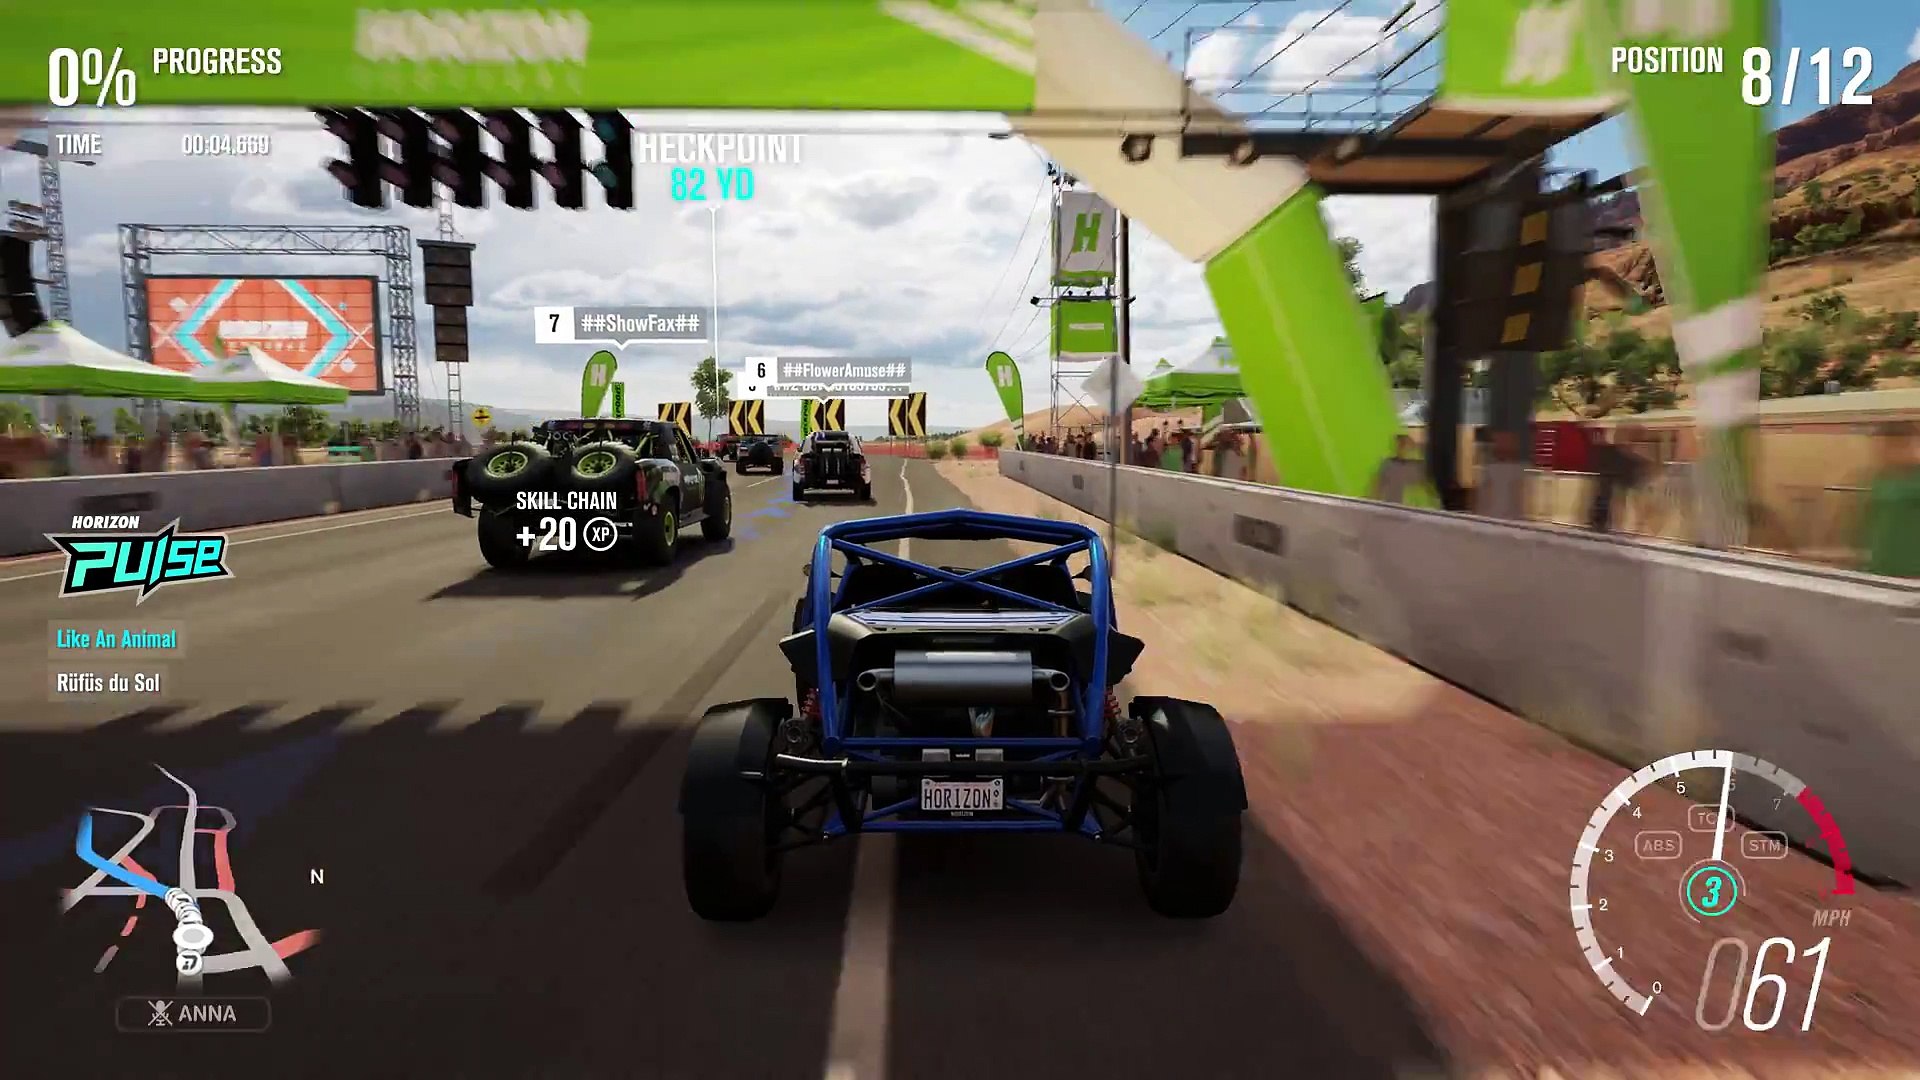 FORZA HORIZON 3: The First 30 Minutes of Gameplay 